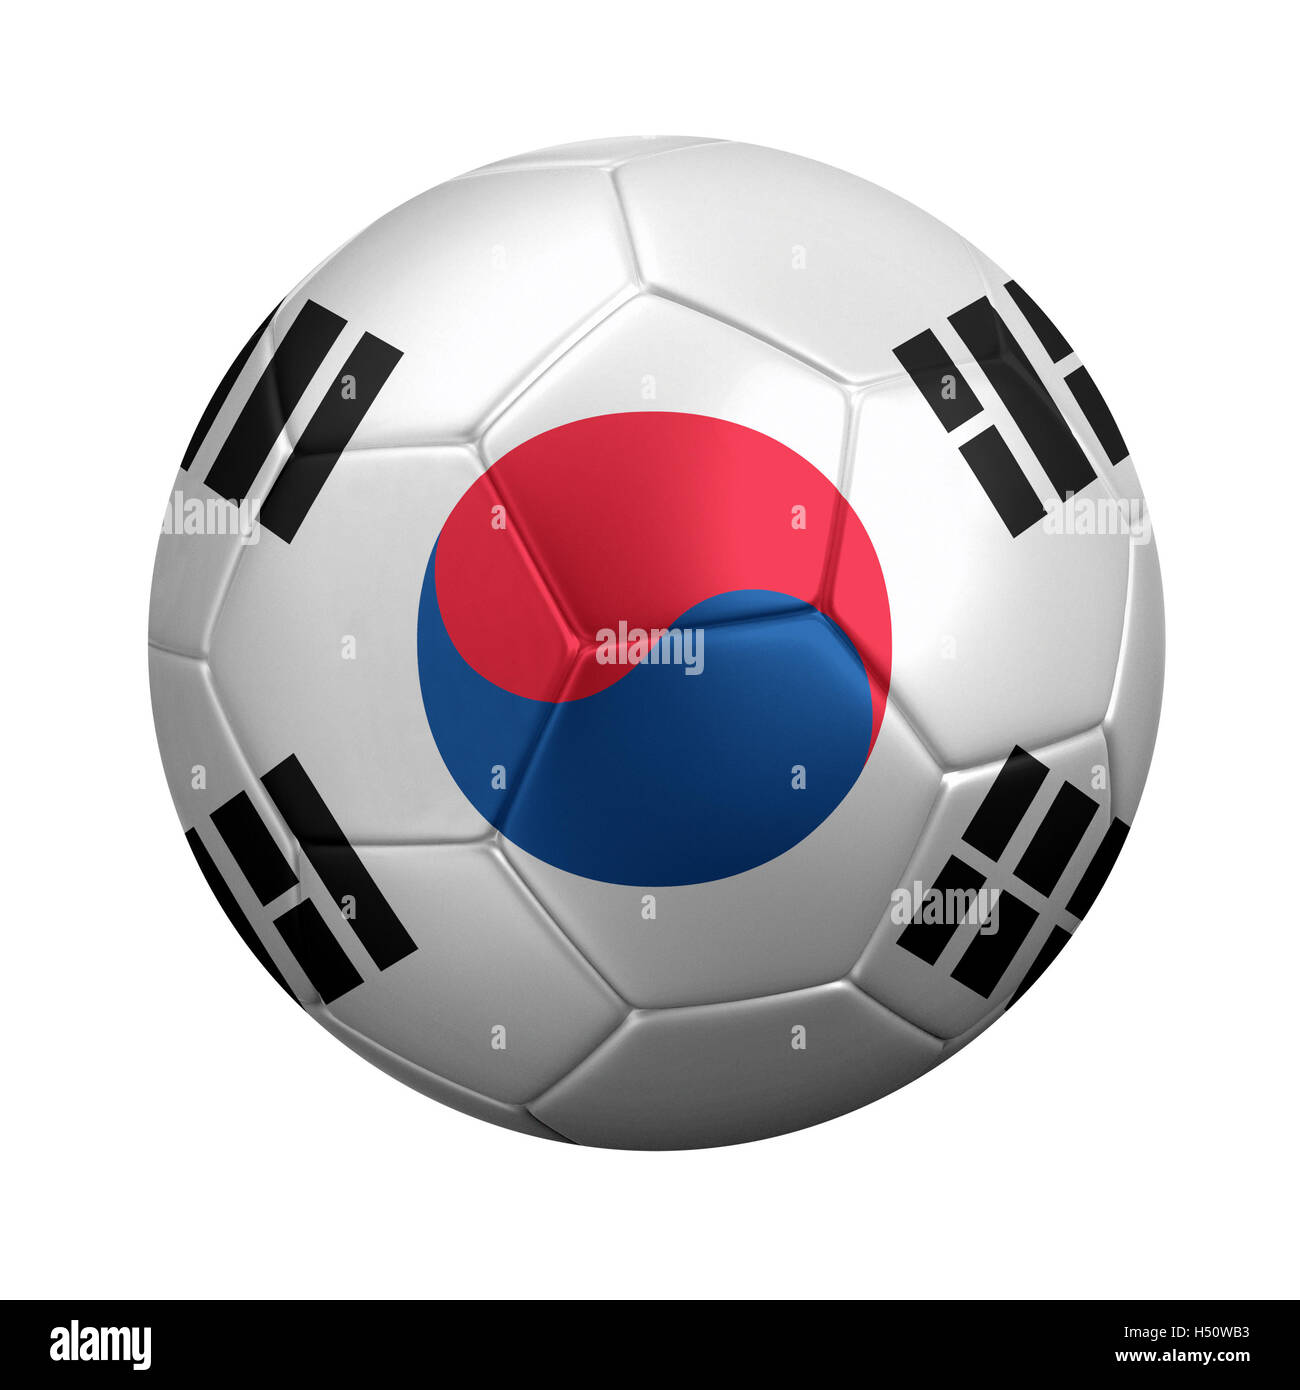 3D rendering of soccer ball wrapped in South Korea's national flag. Isolated on white. Stock Photo